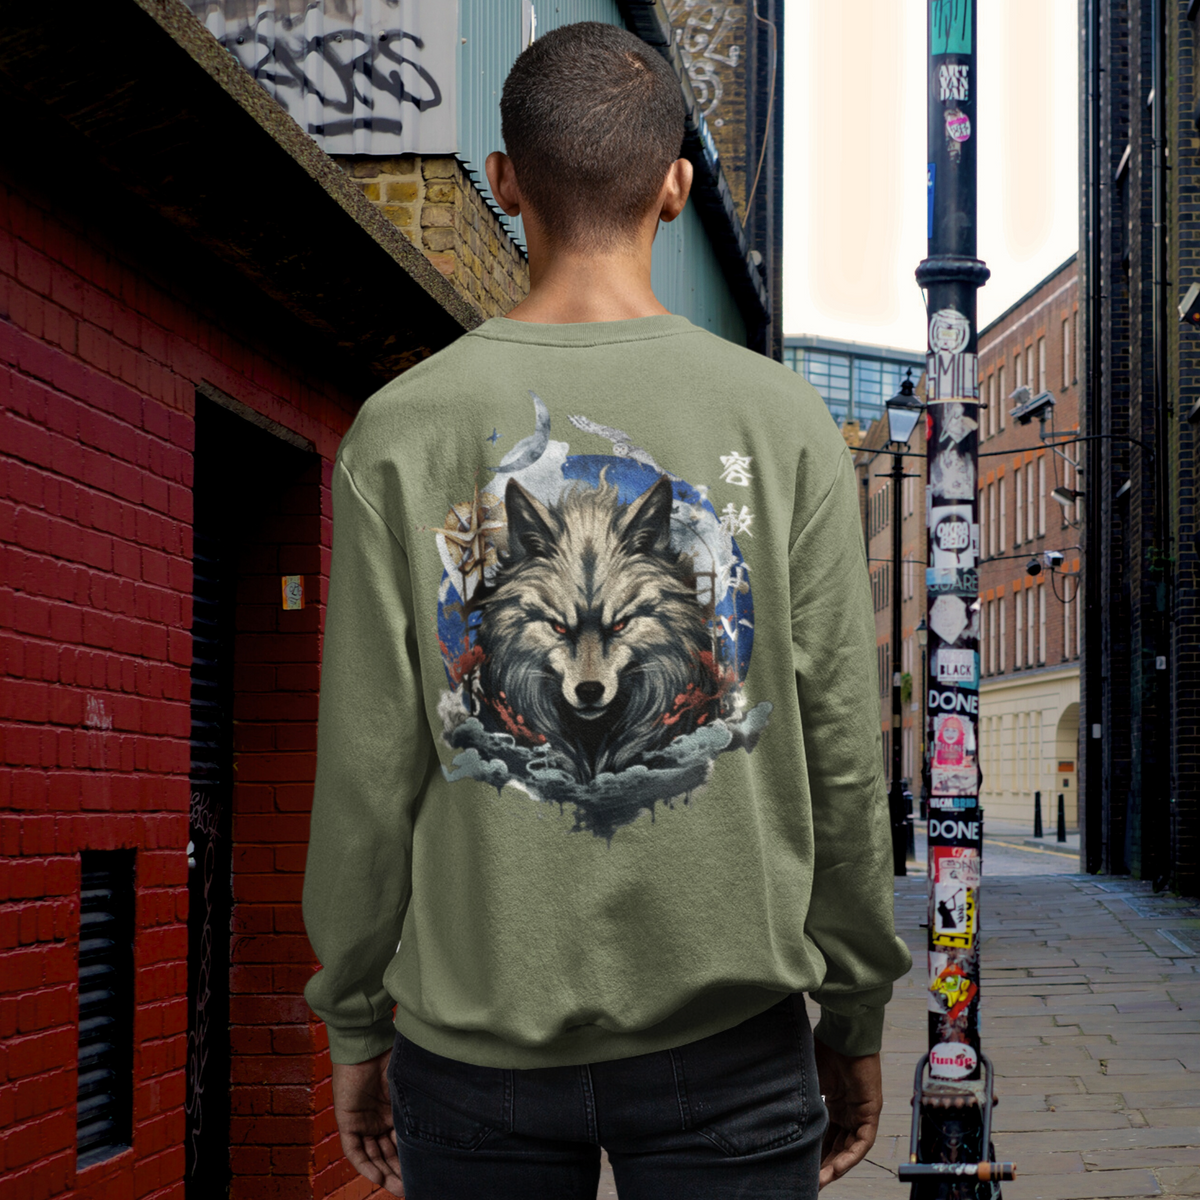 Japanese Wolf Sweatshirt, Cultural Artistry, Folklore Design, Nature and Myth, Compass Theme, Symbolic Apparel, Adventure Wear, Ancient Symbolism, Navigational Art, Mythical Creatures, Tradition and Style, Artistic Sweatshirt, Storytelling Fashion, Heritage Fusion, Wolf Spirit, Contemporary Symbolism, Exploration Vibes, Cultural Fusion, Intricate Prints, Statement Outerwear